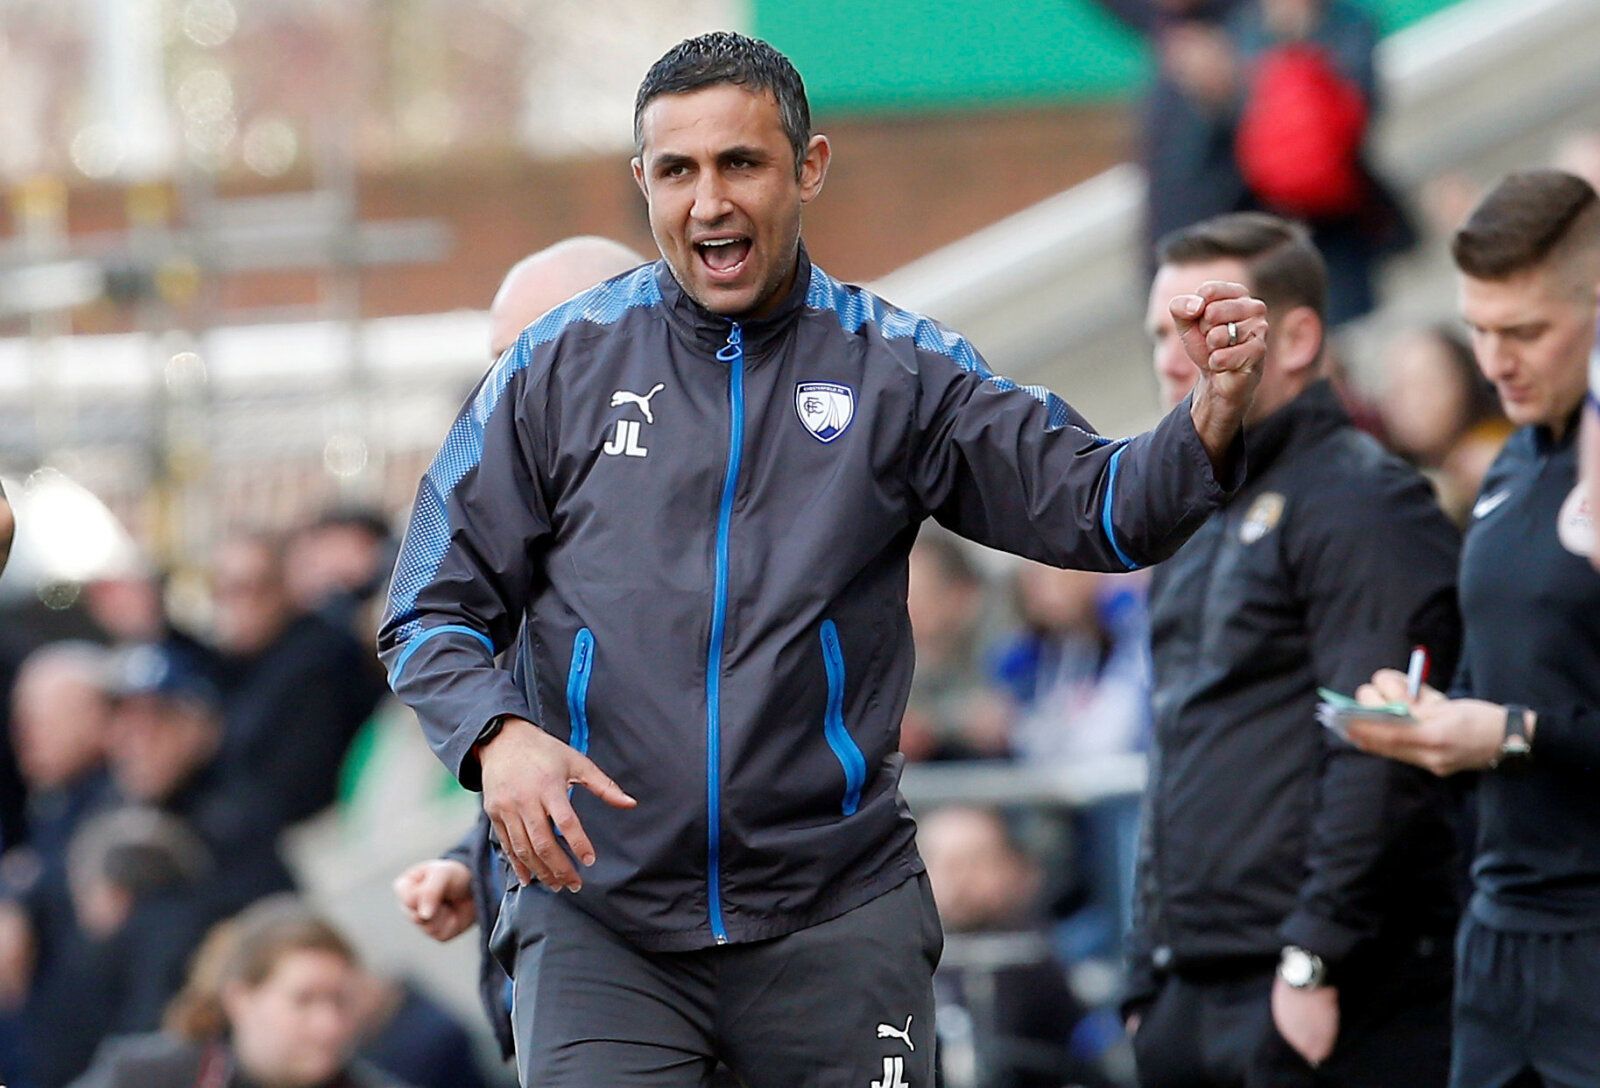 Soccer Football - League Two - Chesterfield vs Notts County - Proact Stadium, Chesterfield, Britain - March 25, 2018   Chesterfield manager Jack Lester celebrates after the final whistle    Action Images/Craig Brough    EDITORIAL USE ONLY. No use with unauthorized audio, video, data, fixture lists, club/league logos or 